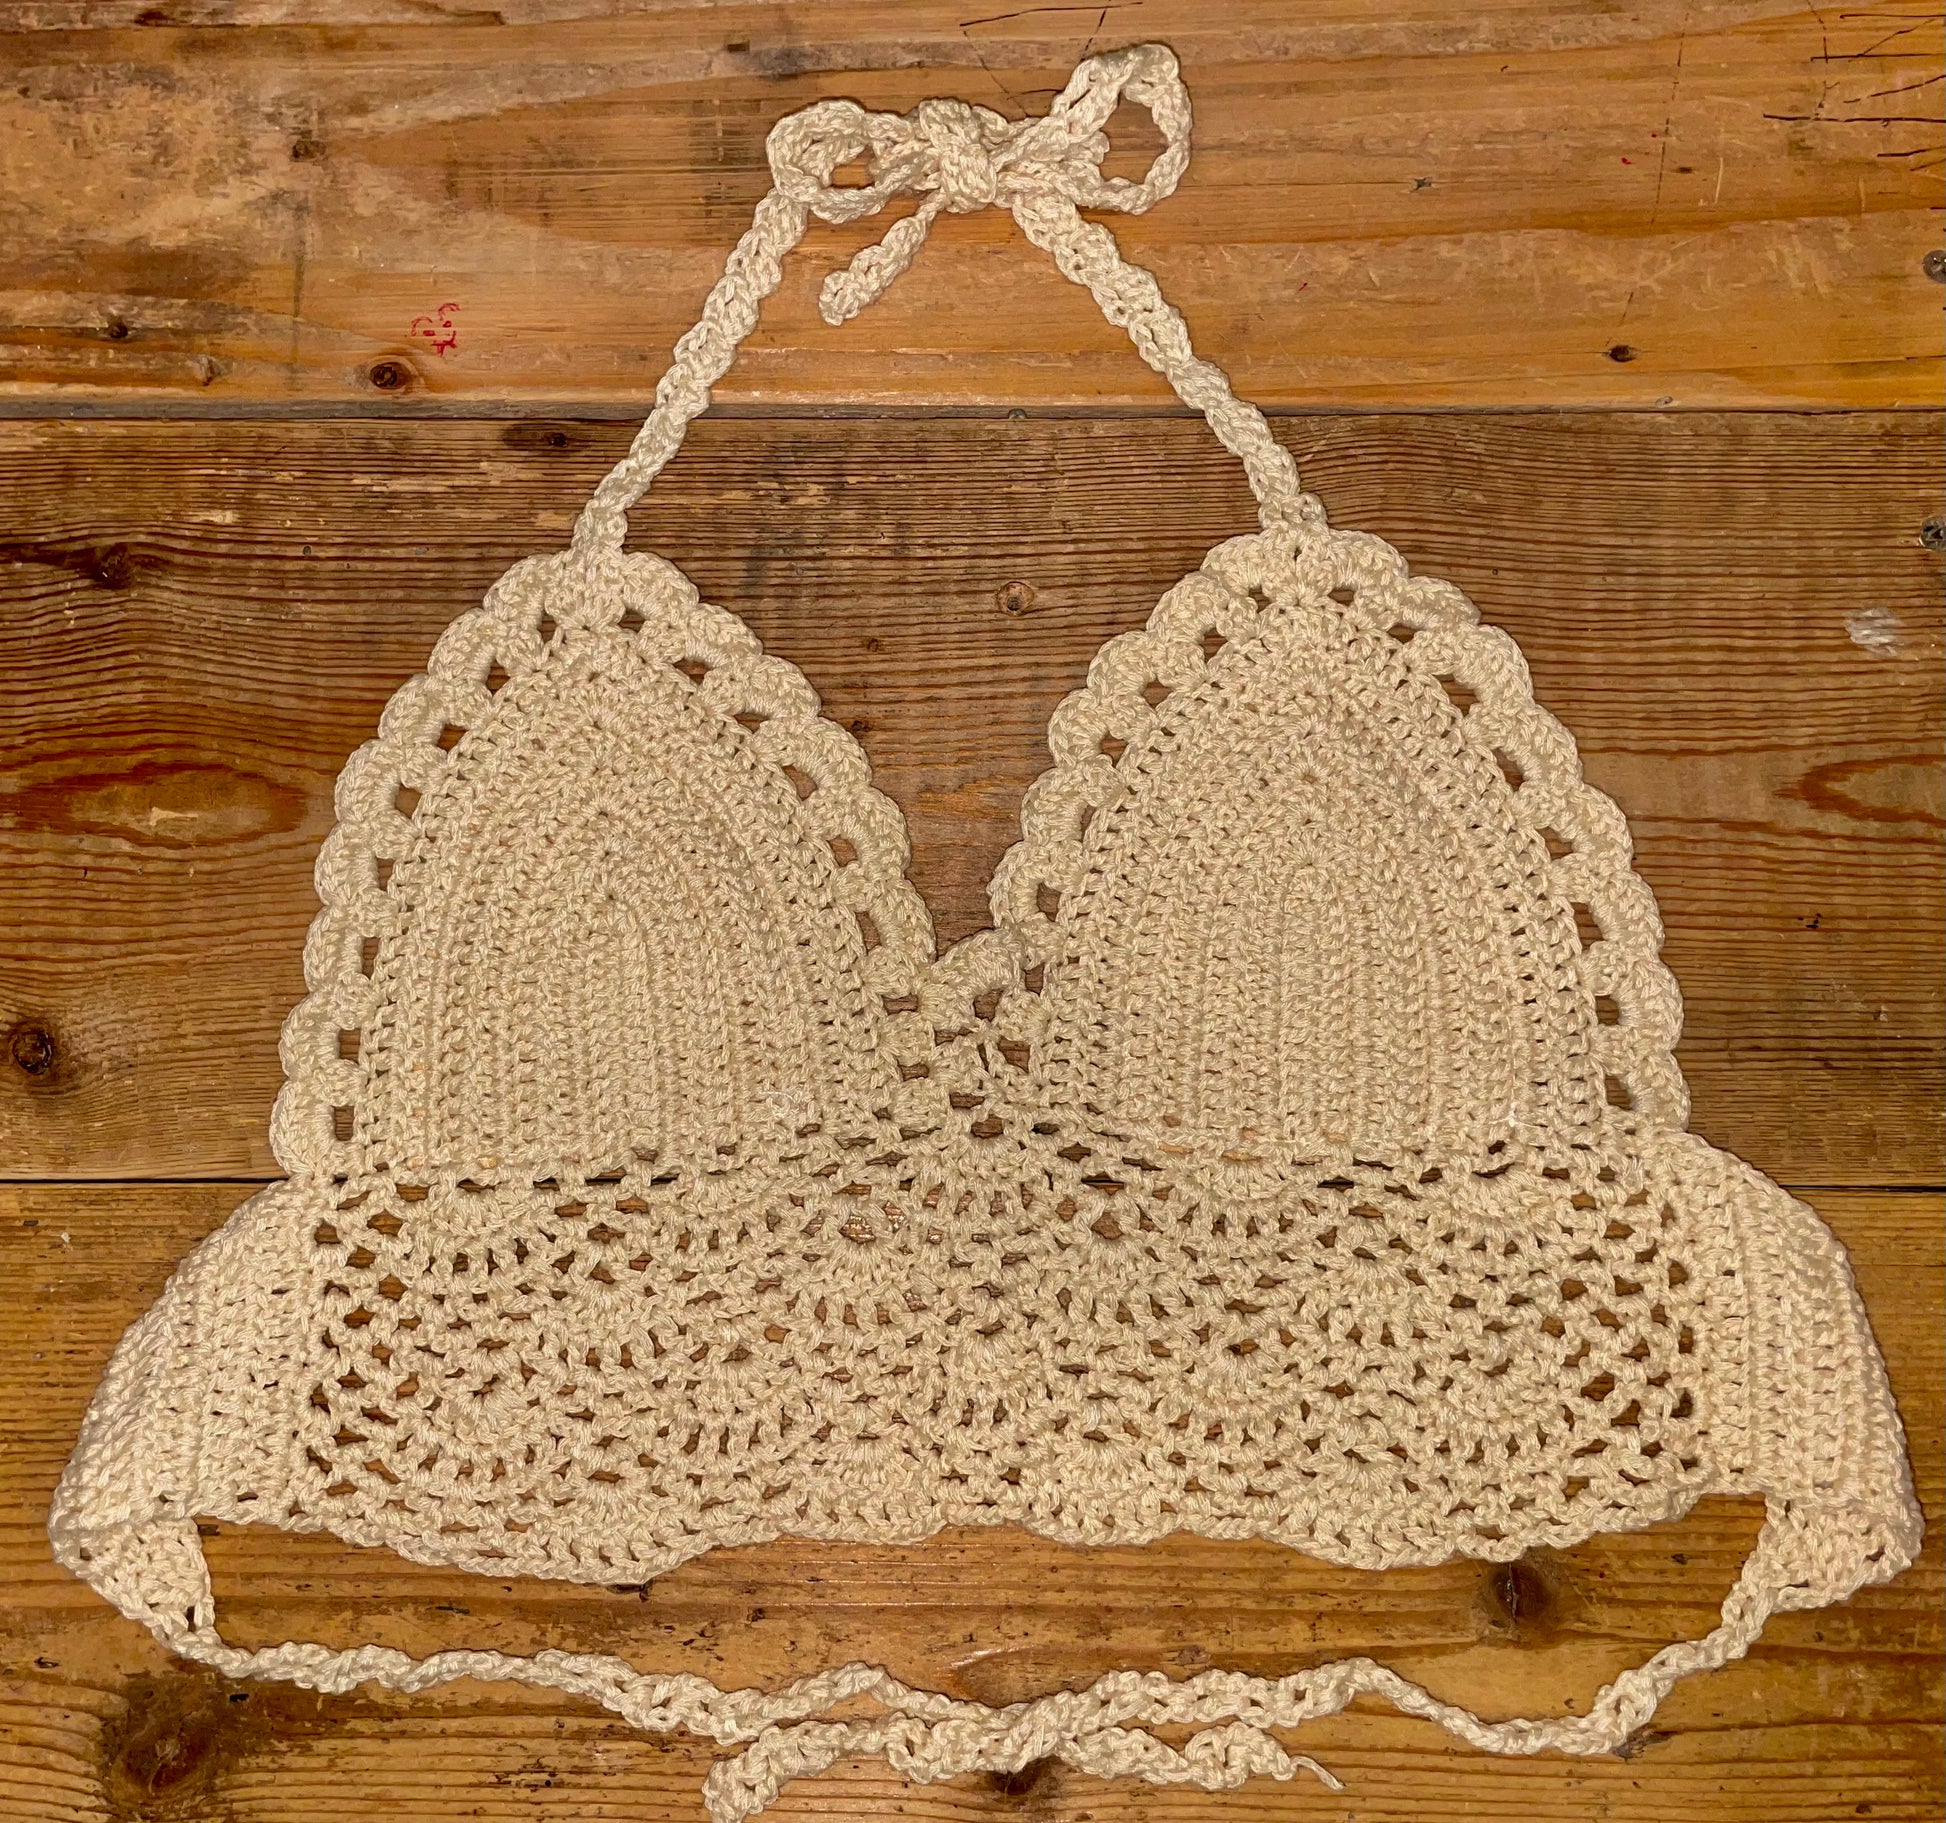 Siesta Crochet Bralette Top: White - Sunrise Direct. Free delivery on  orders over £40. Free click & collect